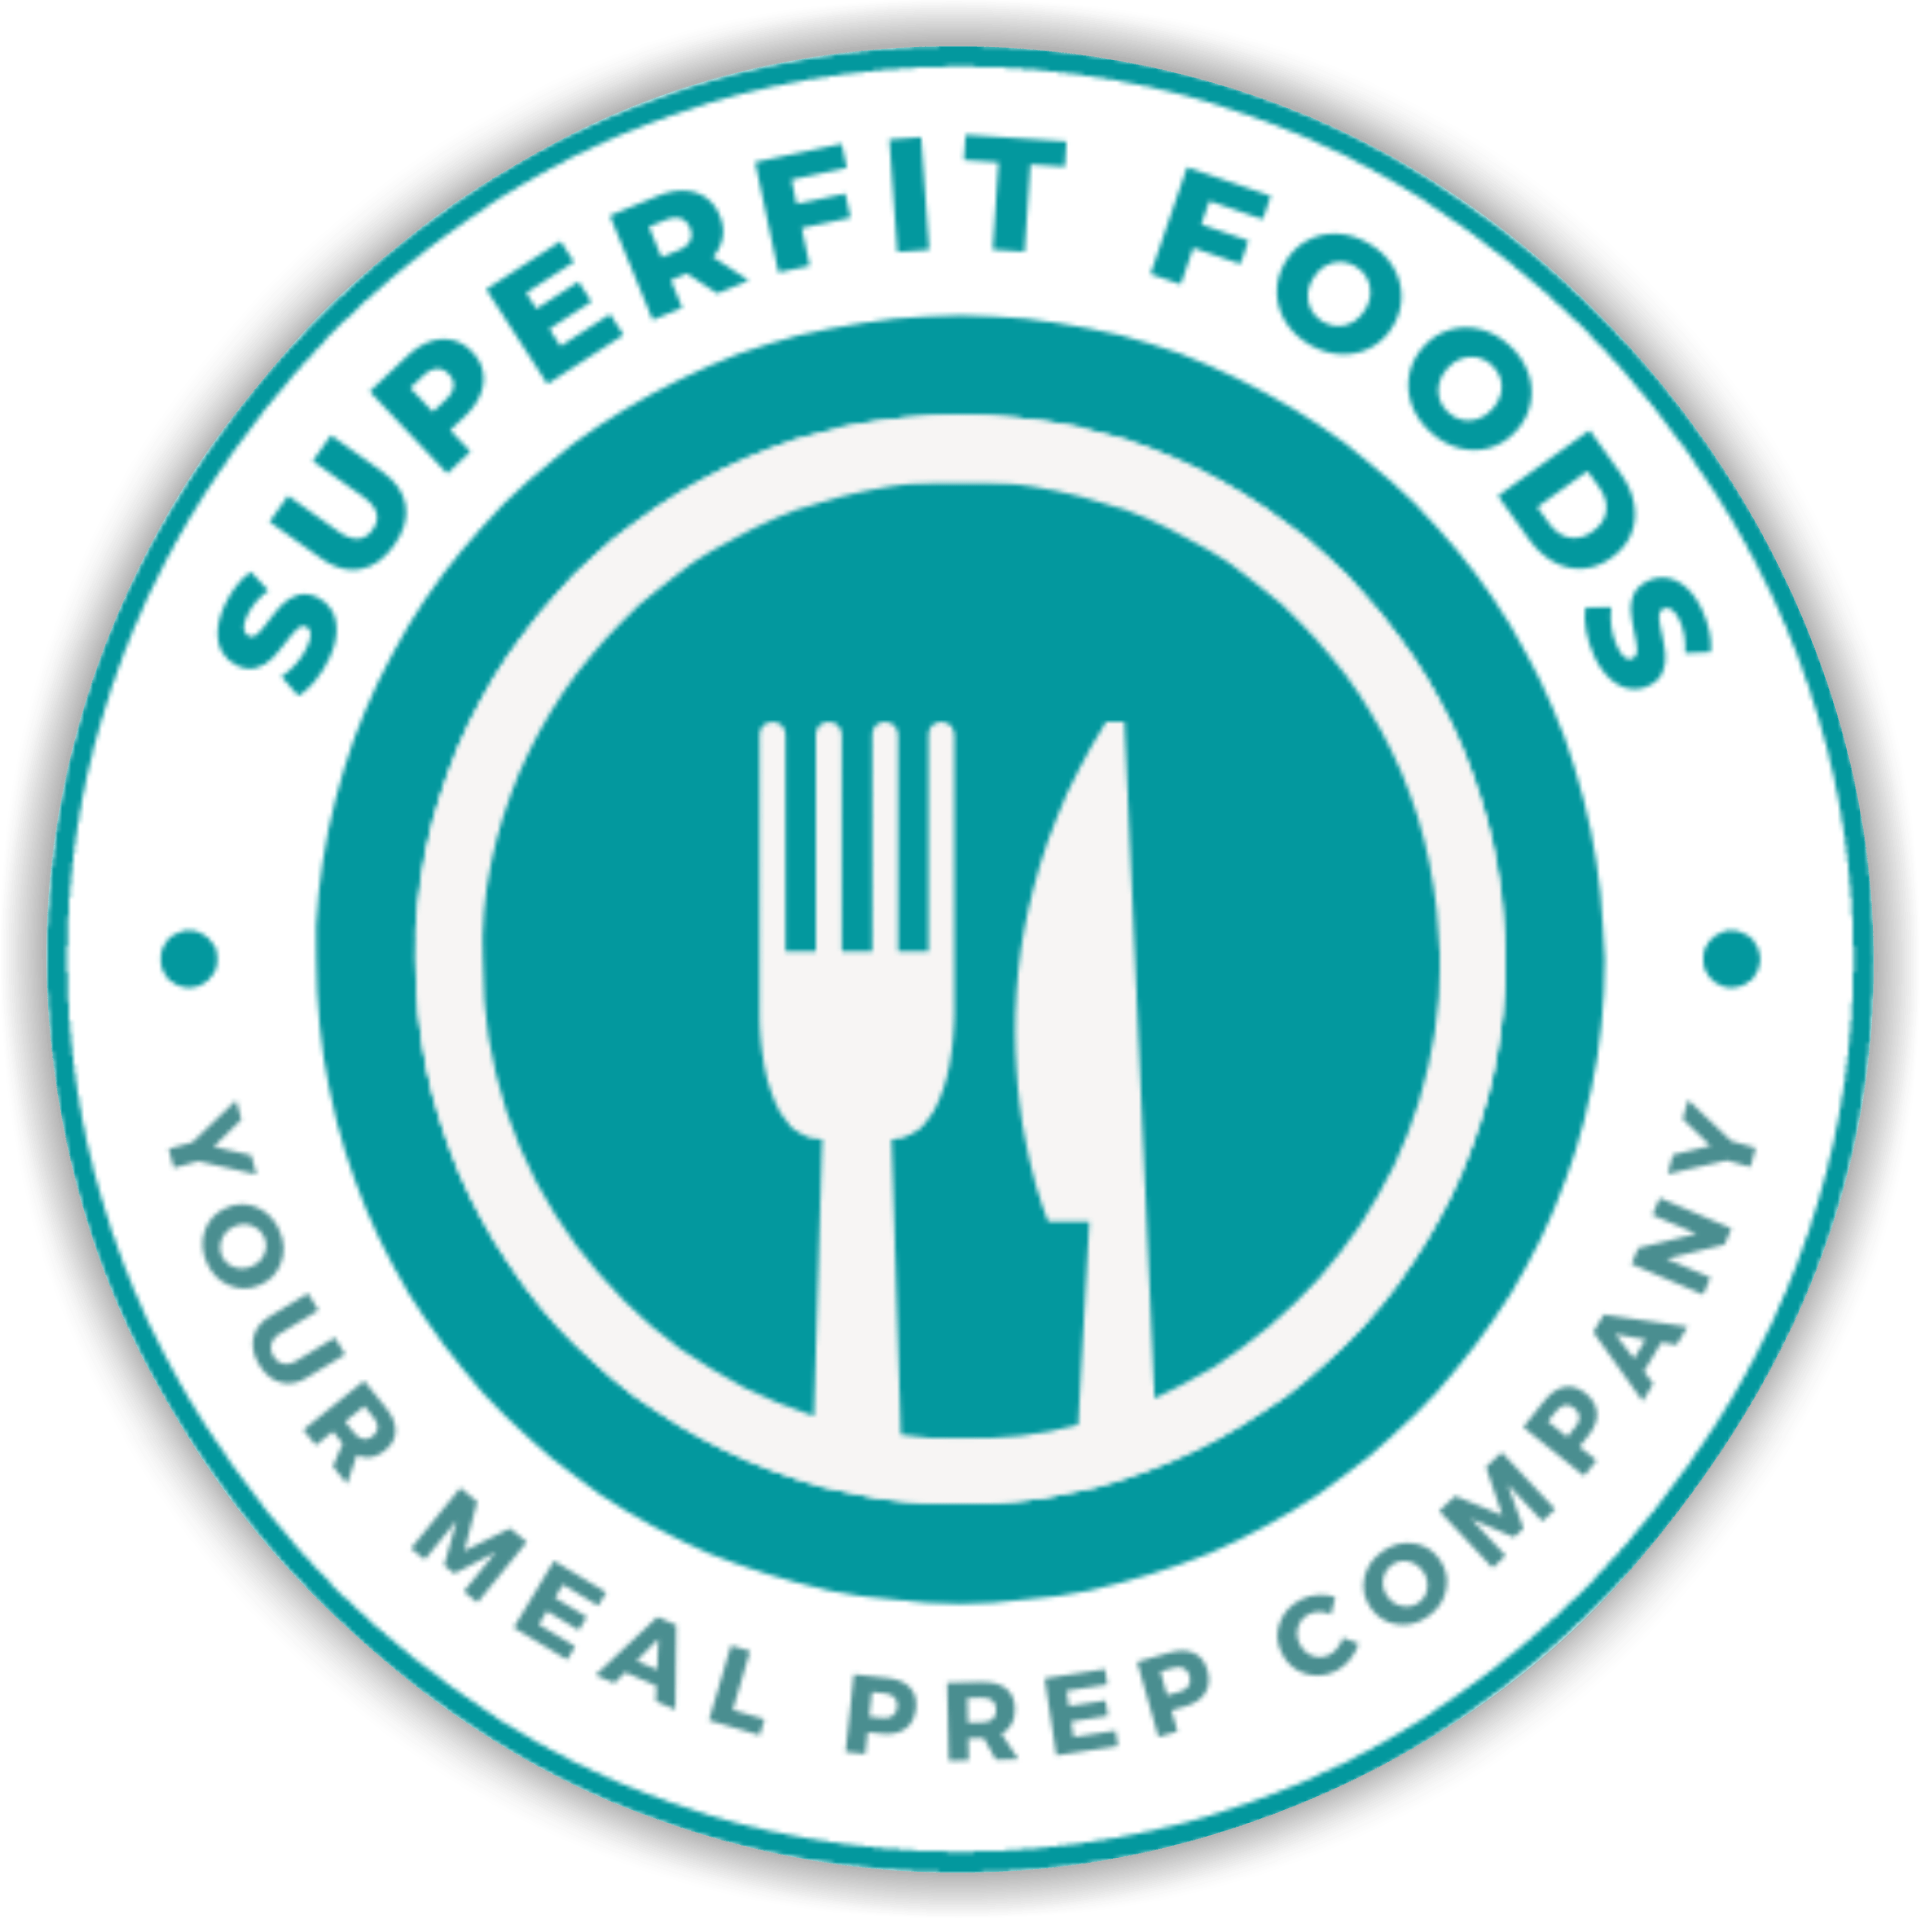 Healthy Pre-Made Meal Prepping in the Jacksonville Area - Superfit